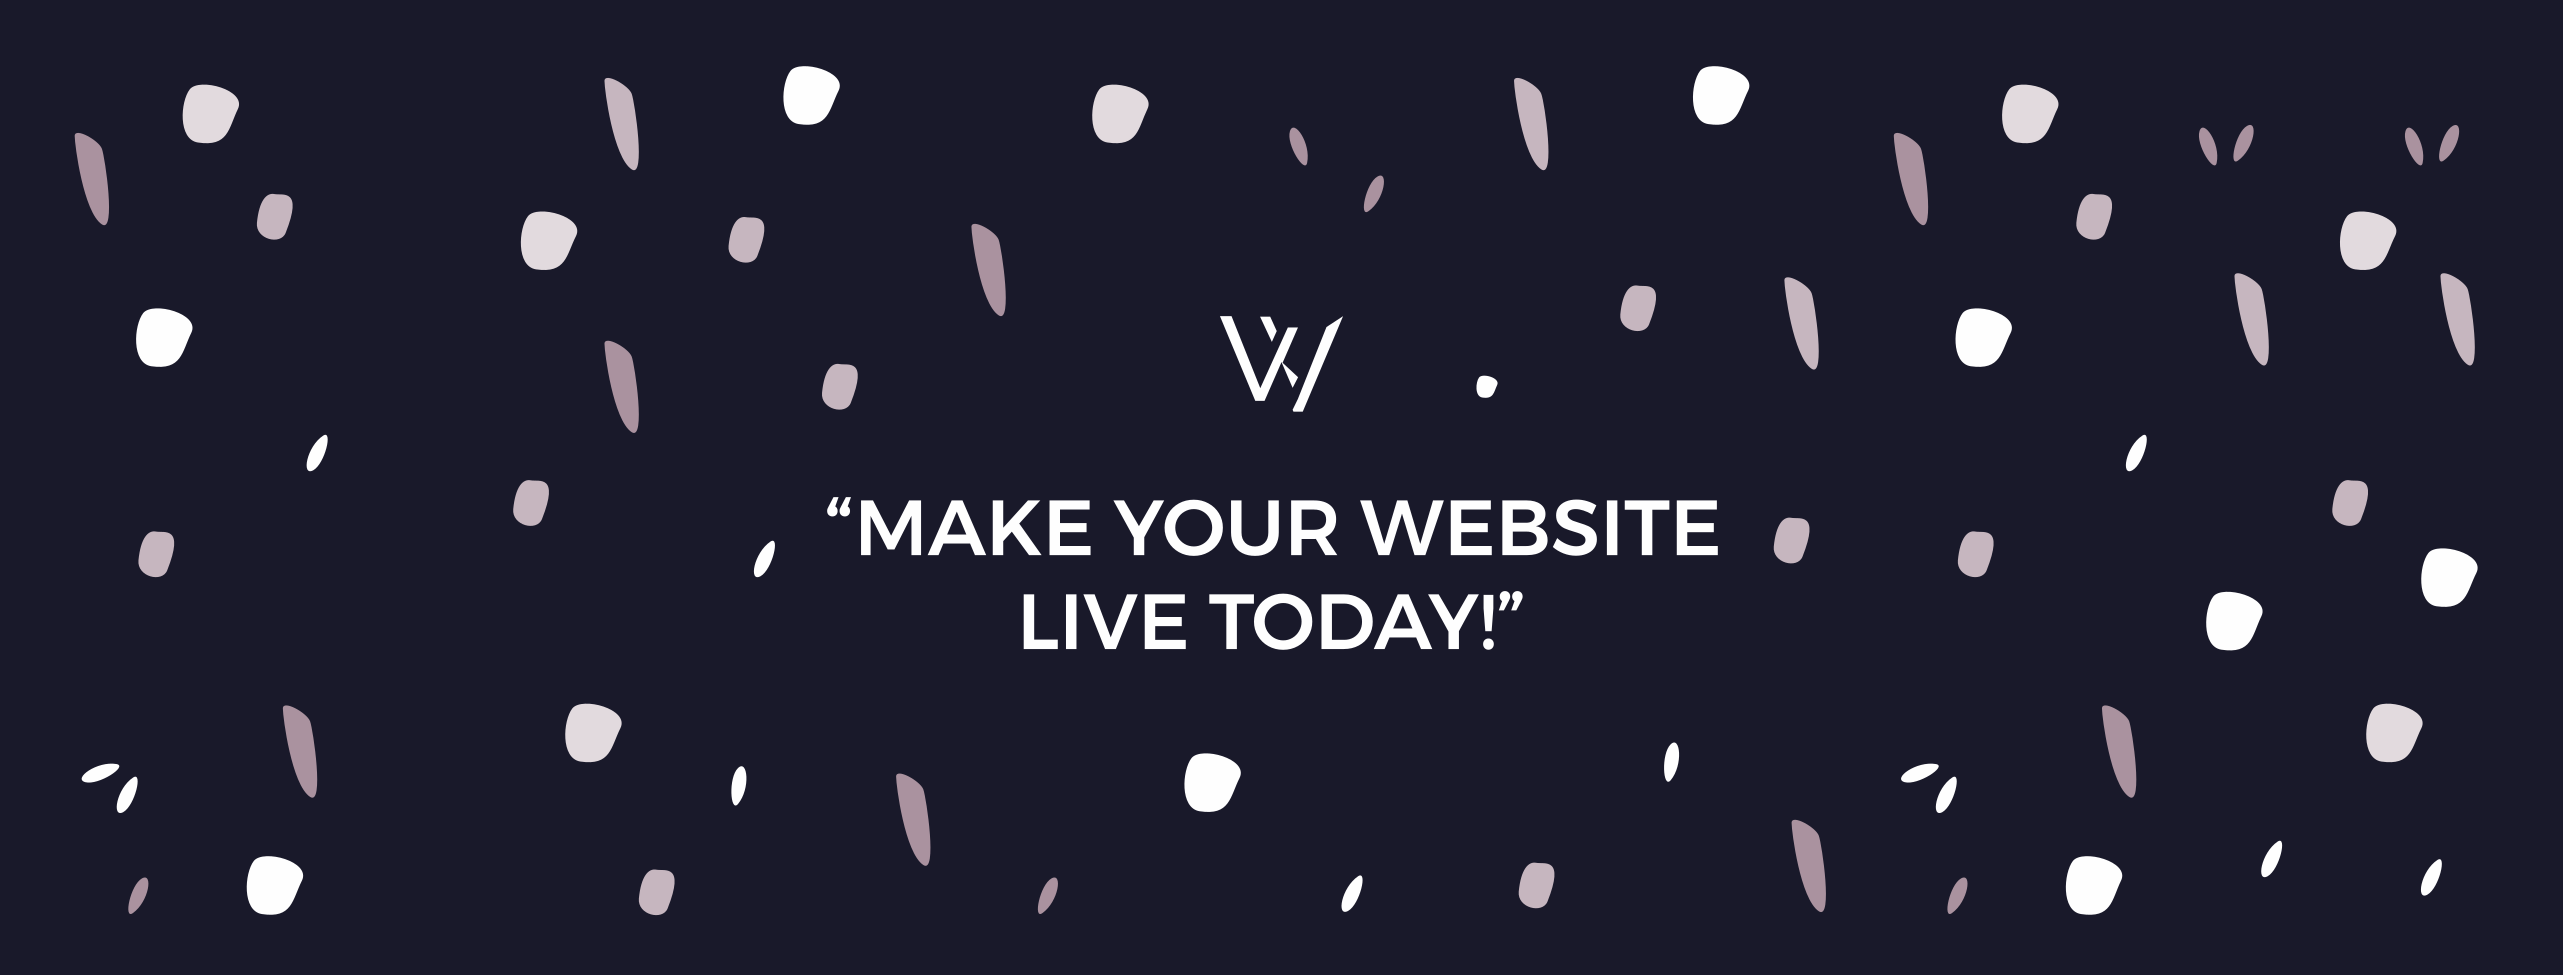 Make your website live today!